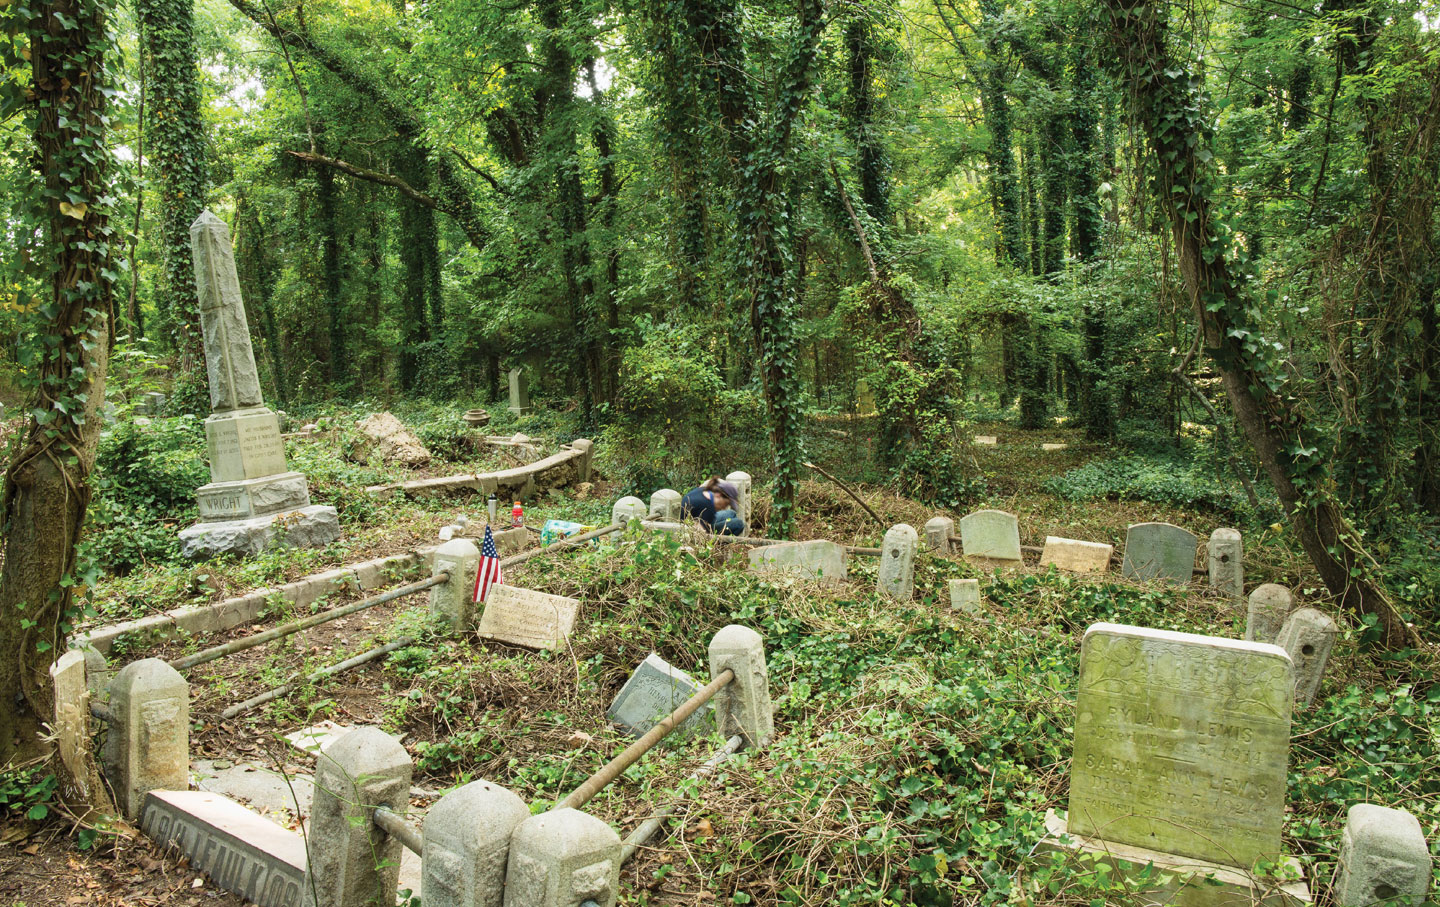 East End Cemetery in Richmond, Virginia, is one of several historic black cemeteries that have been overtaken by weeds and trash.